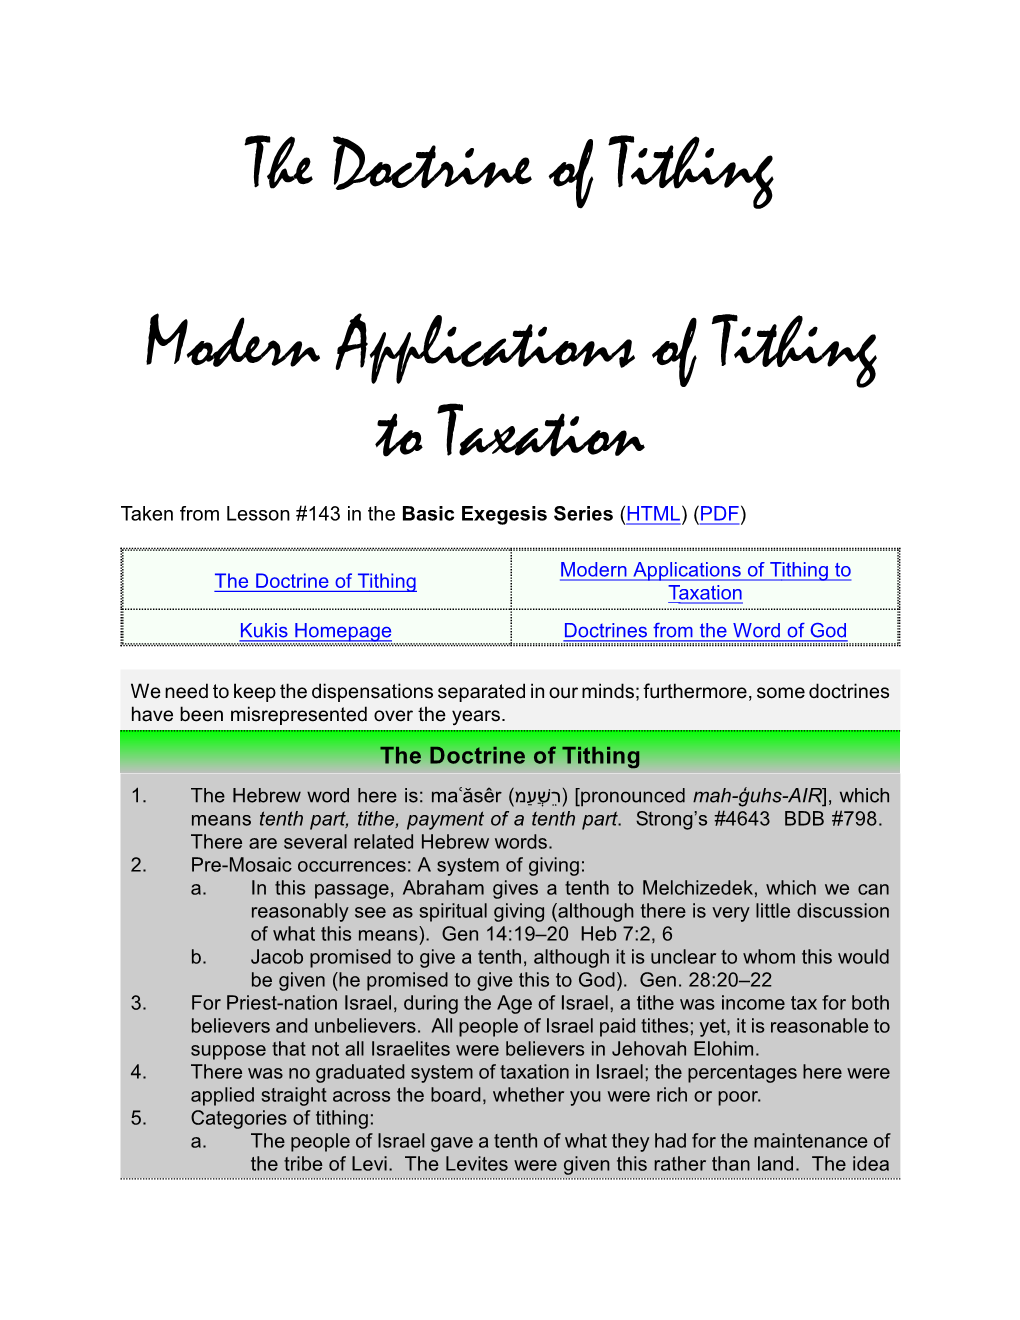 The Doctrine of Tithing Modern Applications of Tithing to Taxation